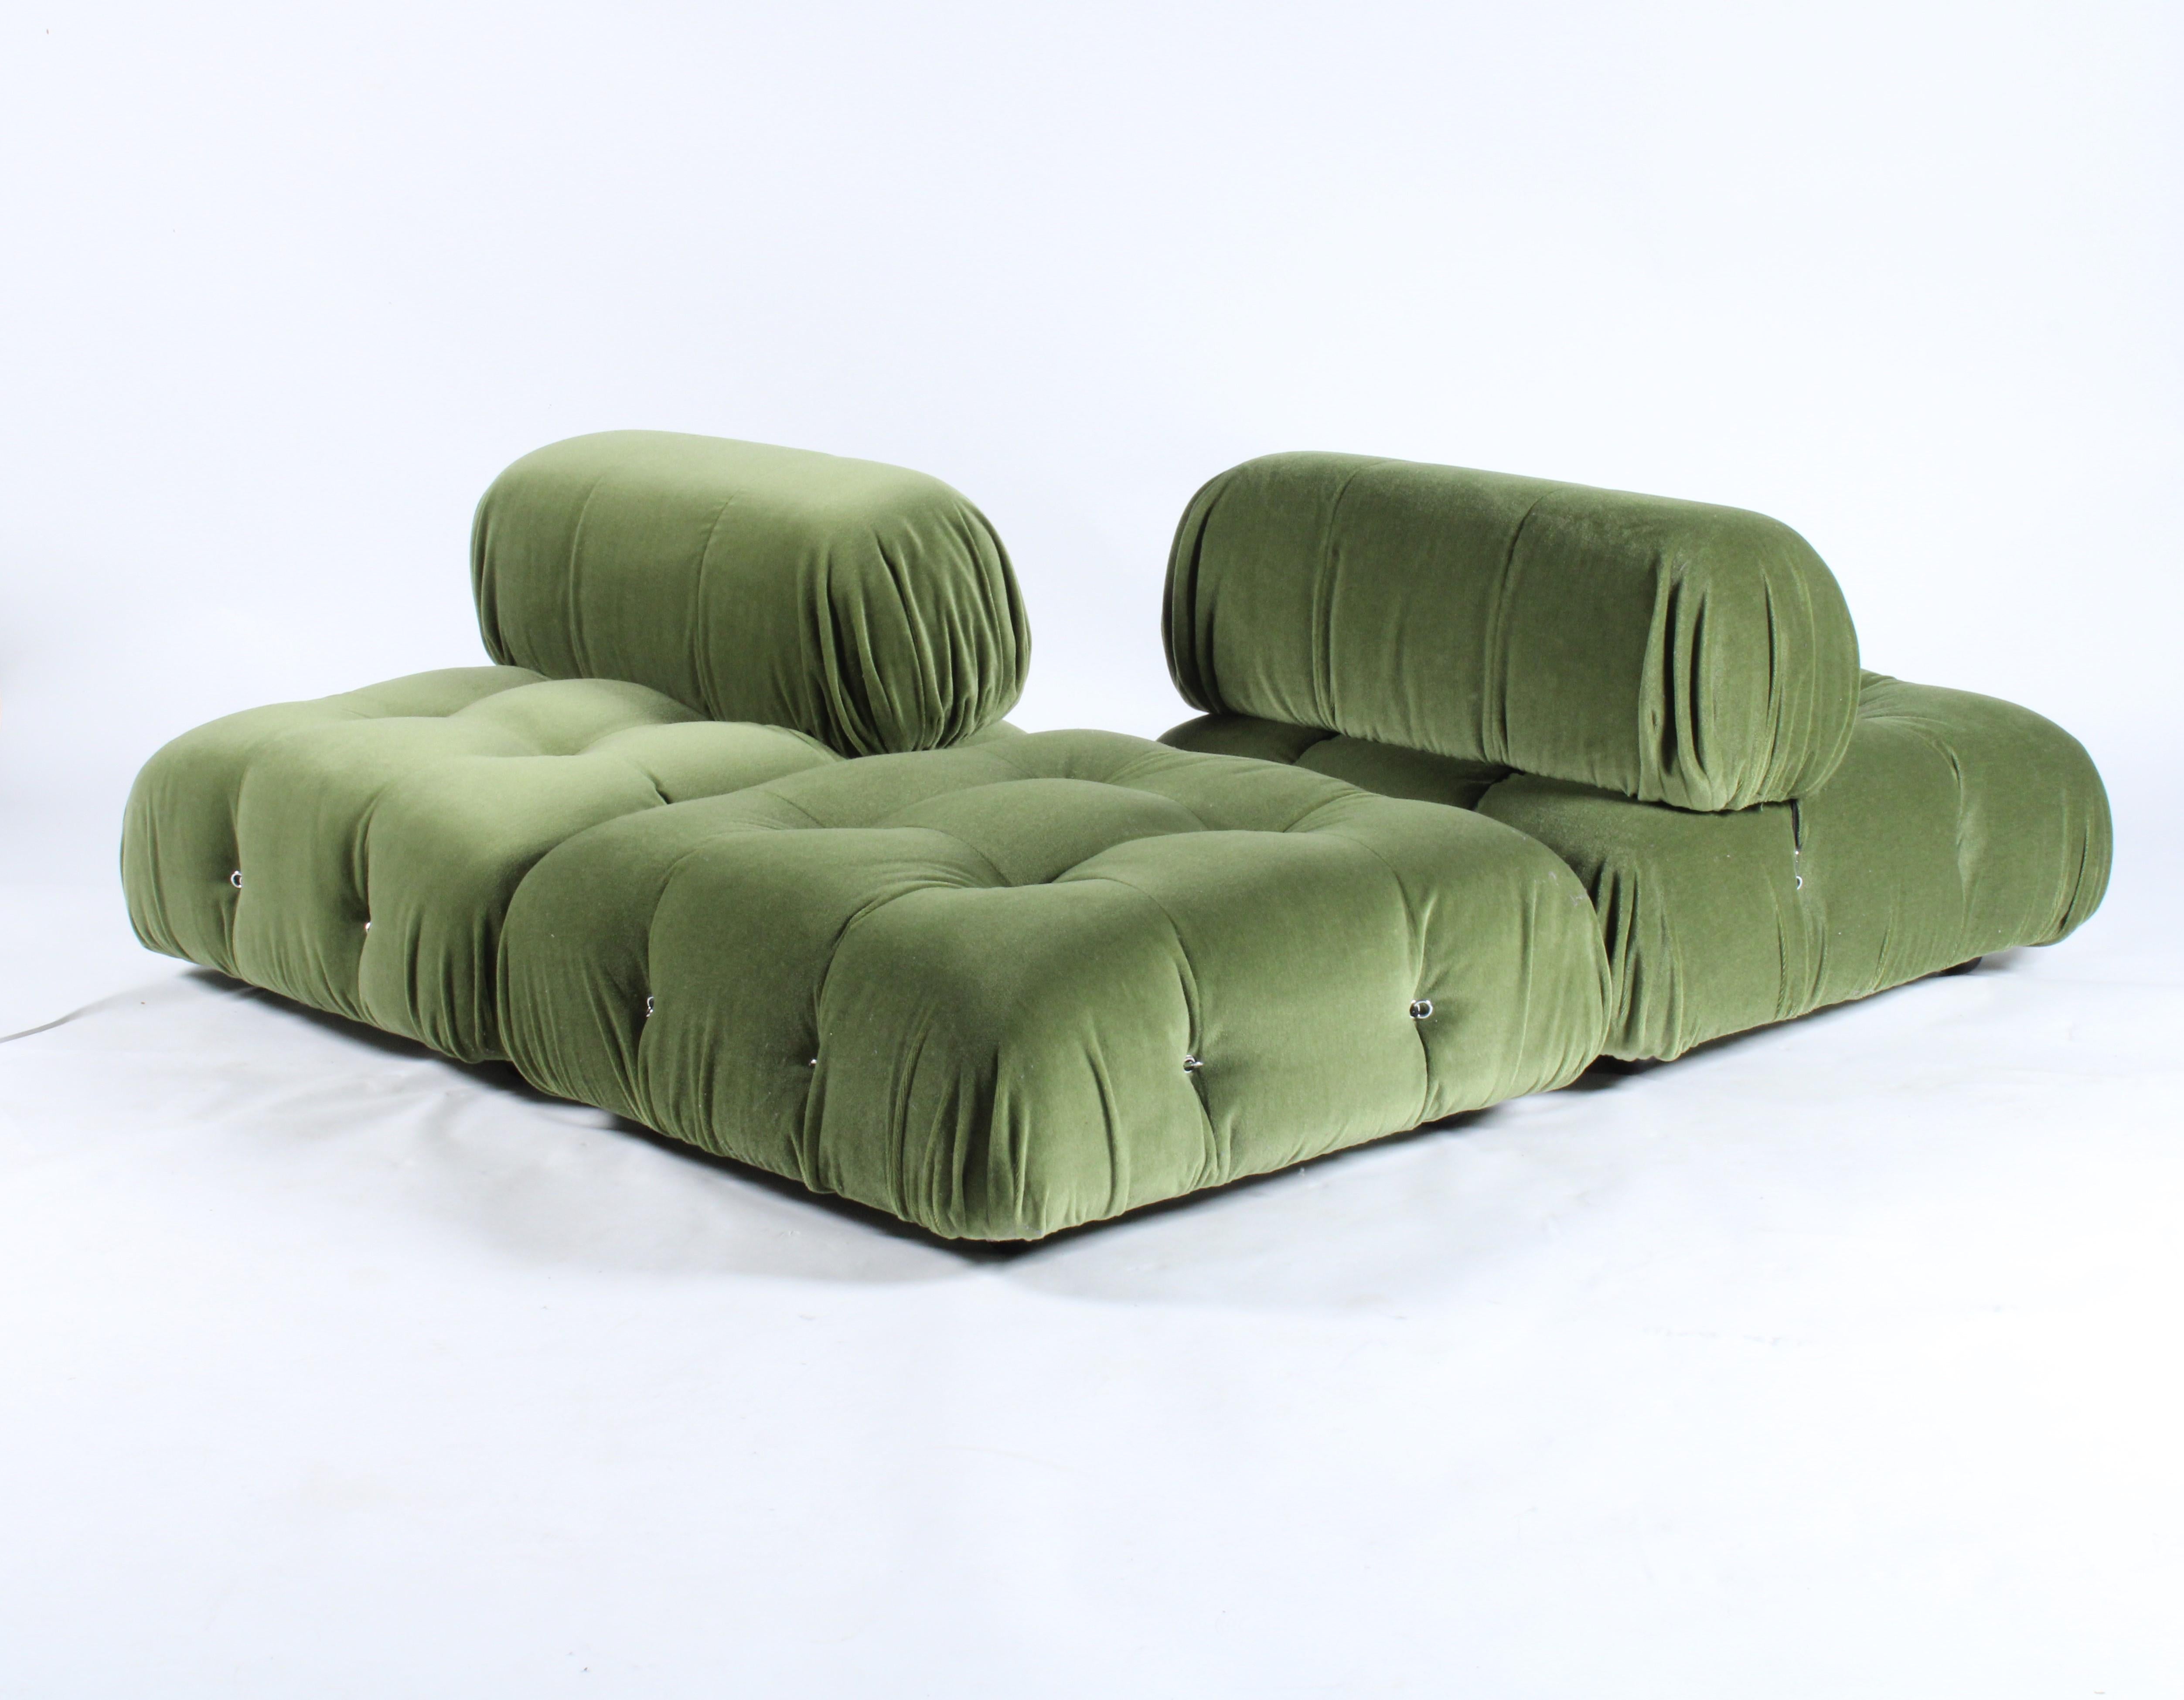 One of the finest examples currently available of the iconic Mario Bellini masterpiece. Offered for sale are five individual pieces four of which have a back rest and one without. As a modular sofa this piece offers the owner endless choices on how